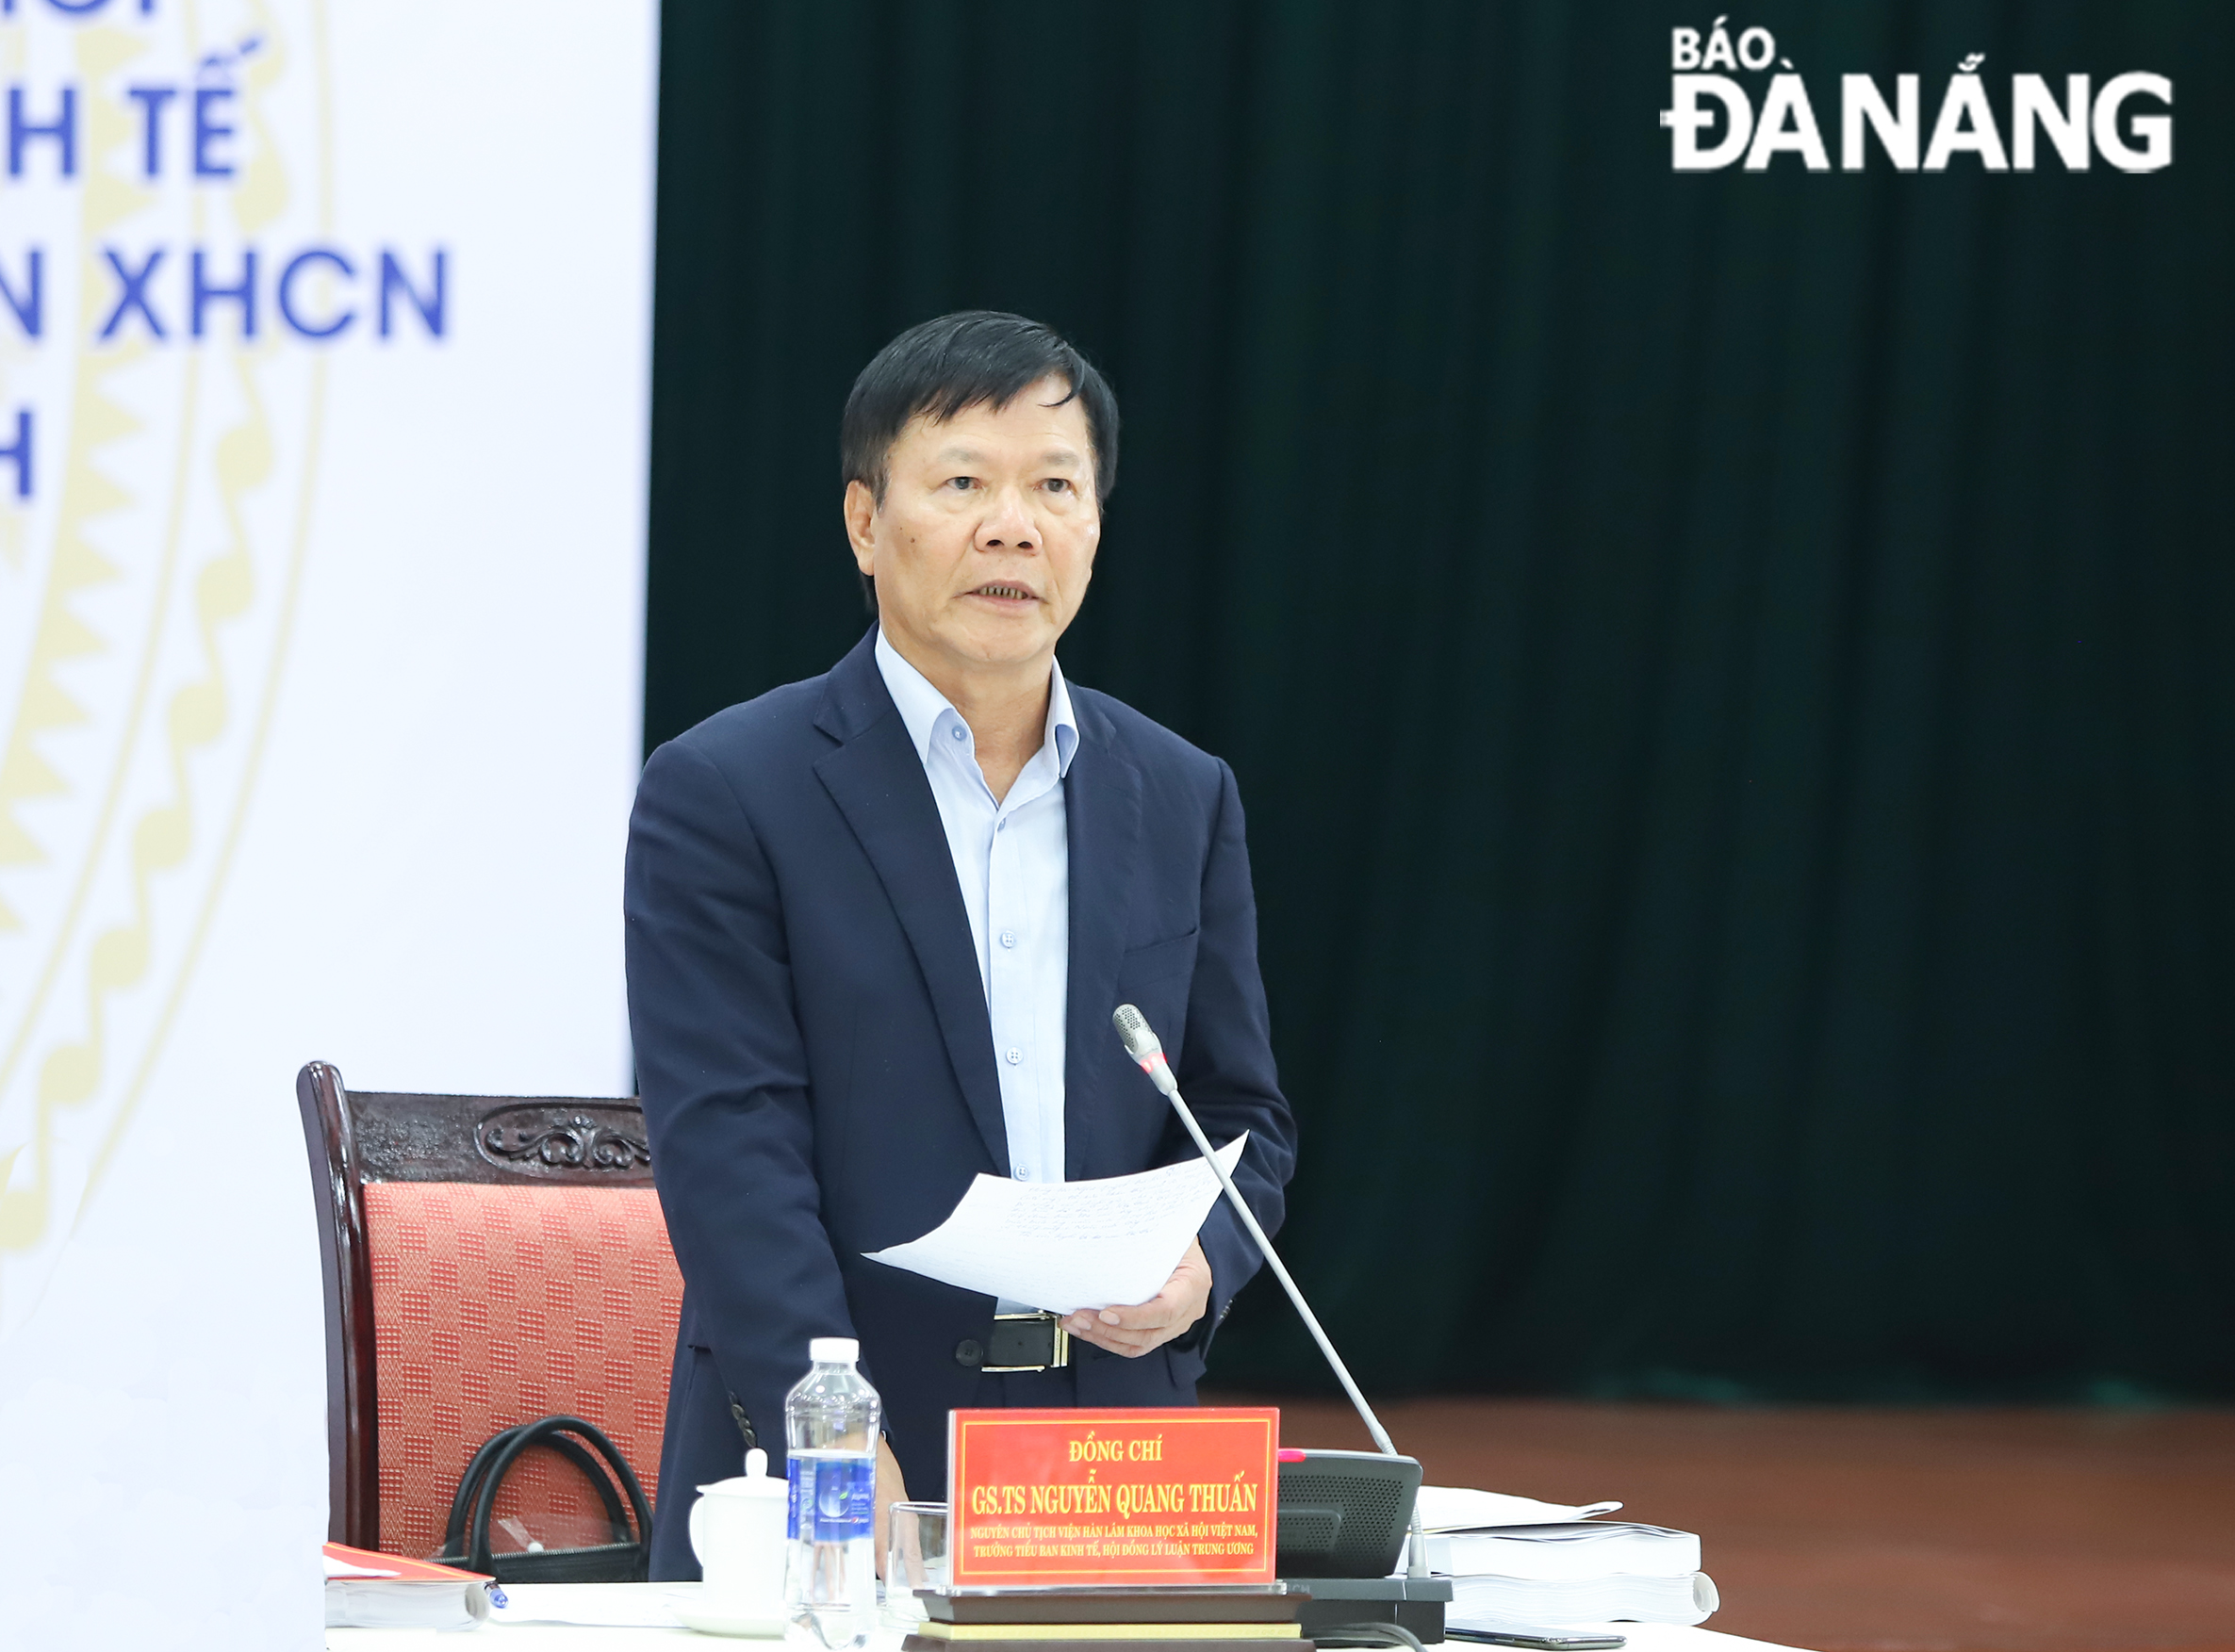 Prof. Dr. Nguyen Quang Thuan delivering his closing speech at the conference on the morning of December 26. Photo: NGOC PHU